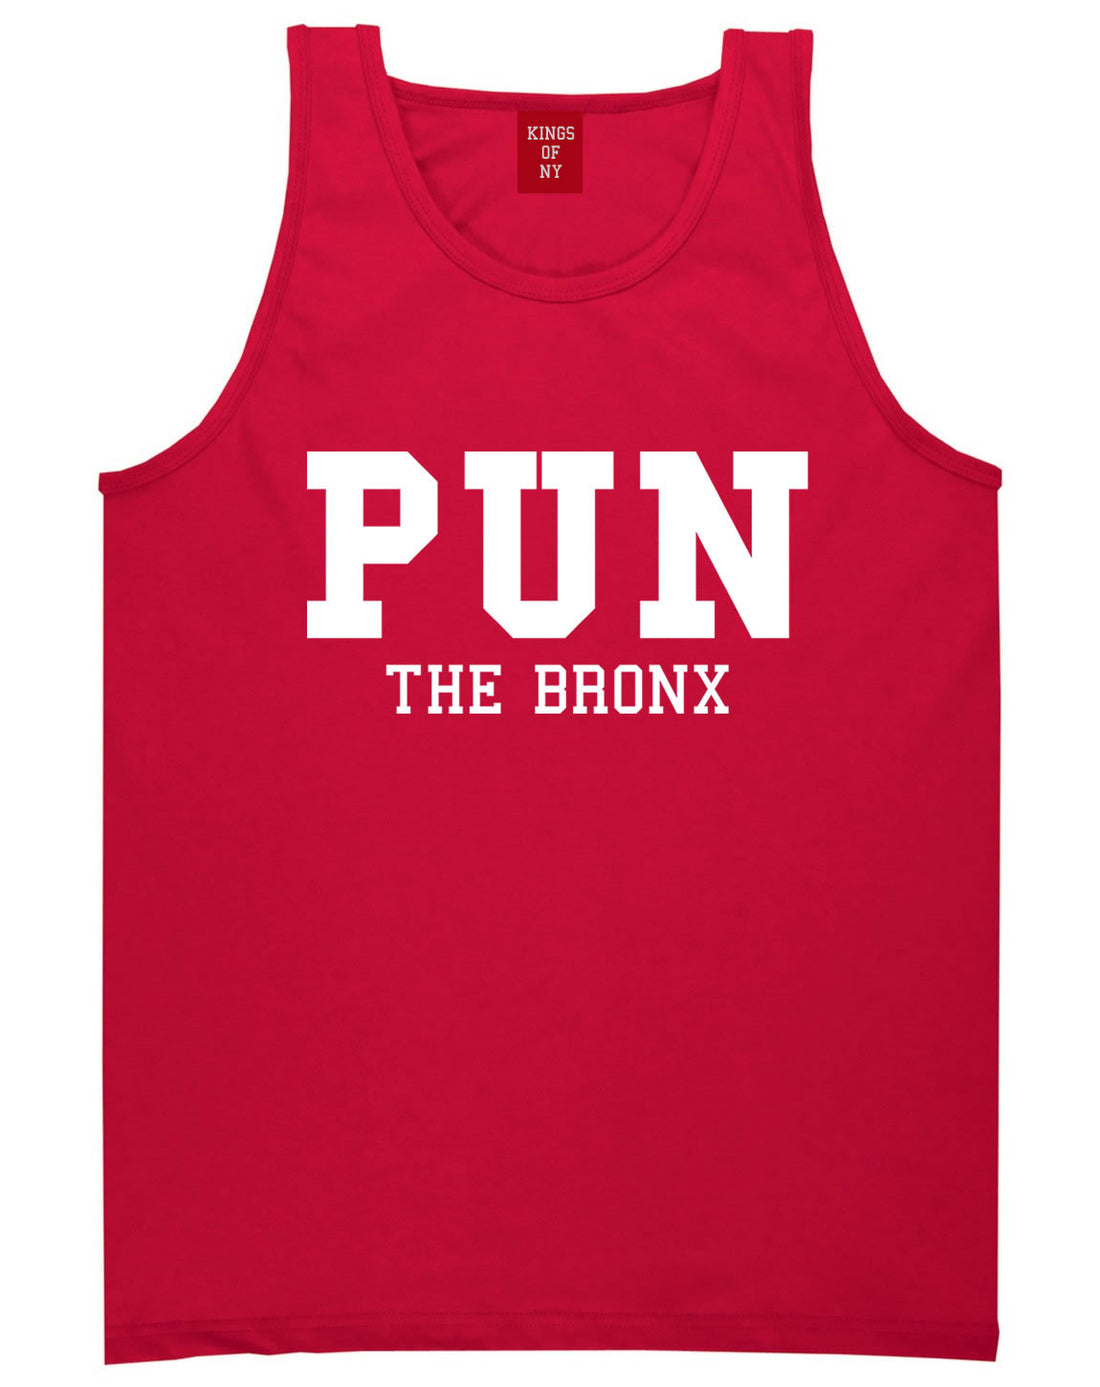 Pun The Bronx Tank Top in Red by Kings Of NY